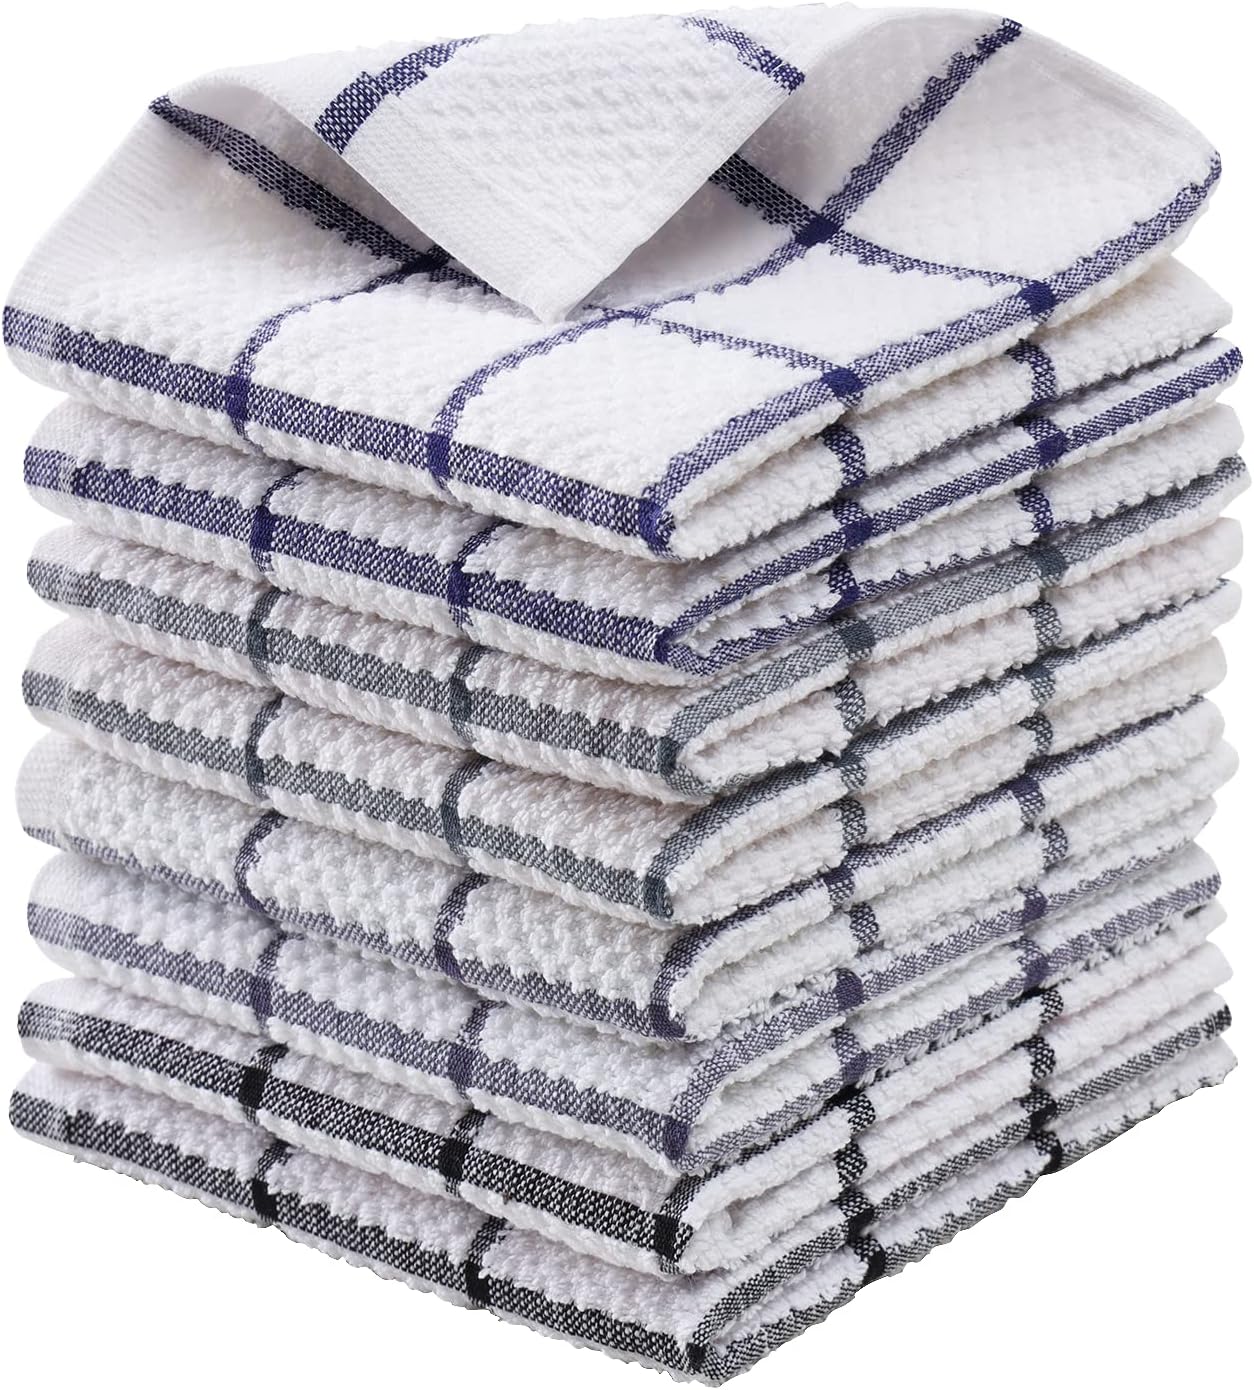 Terry Cloth Kitchen Towels